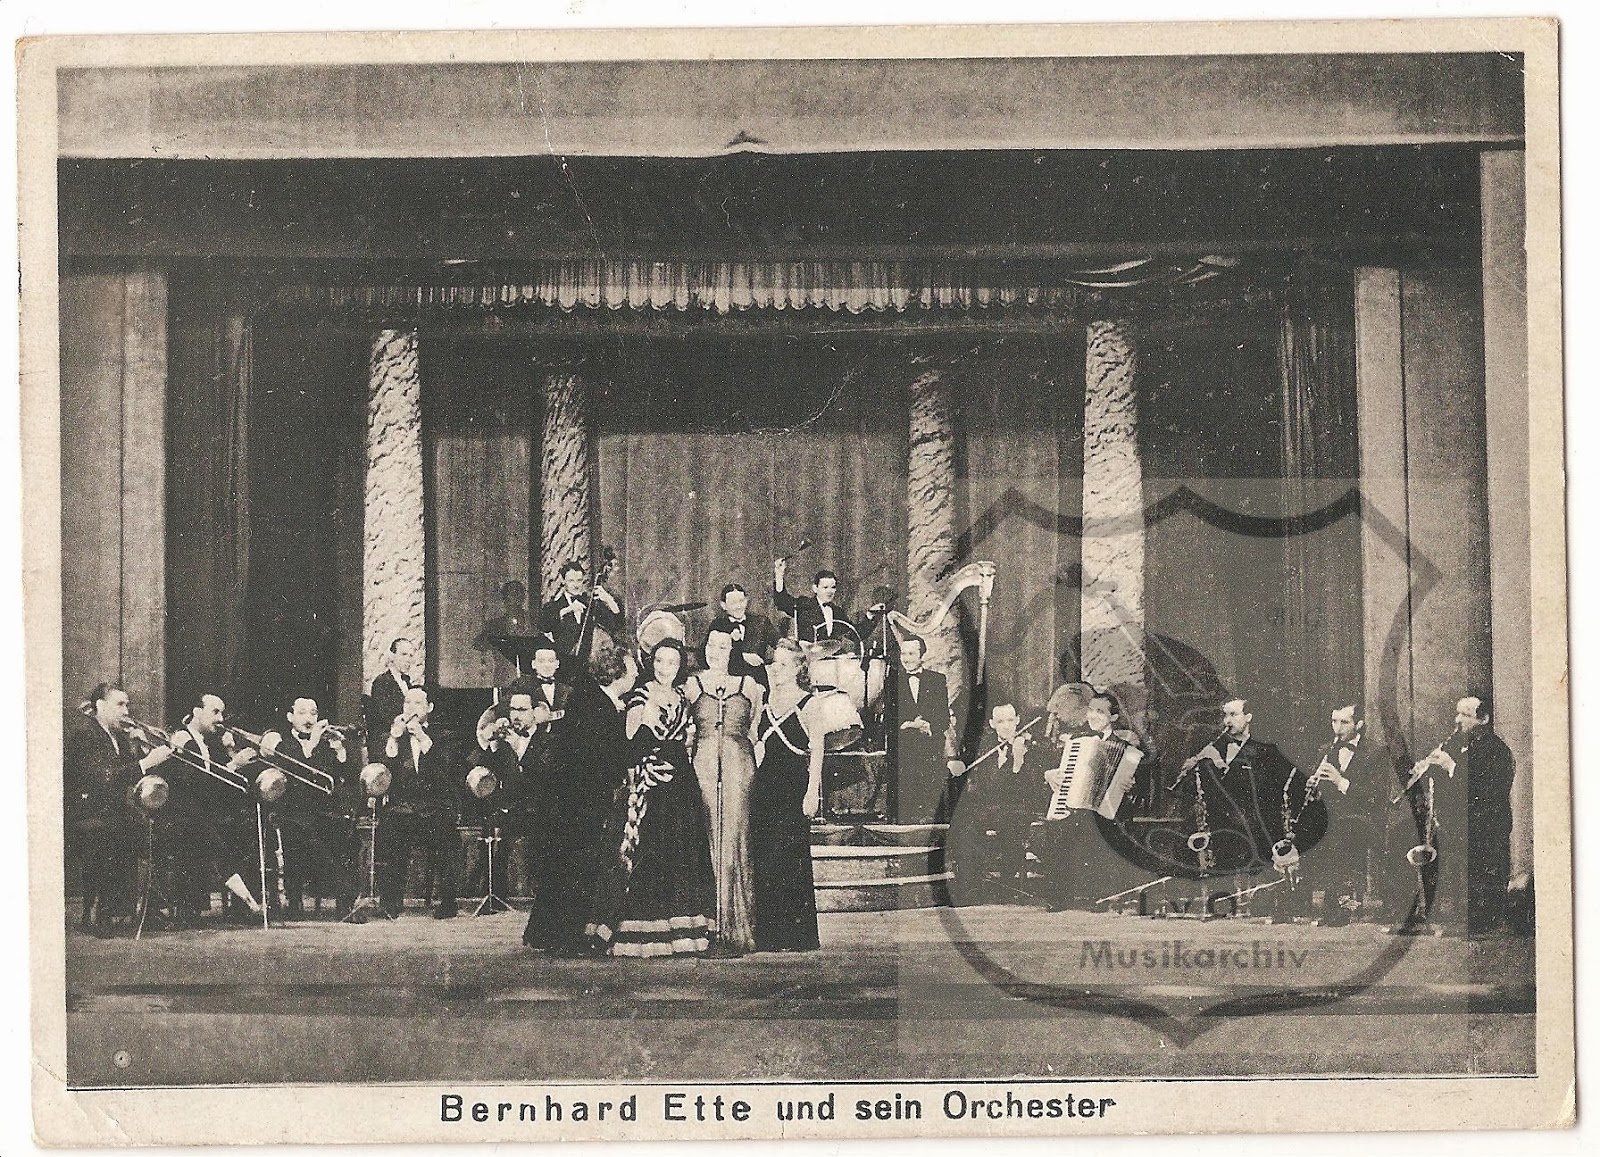 Photograph of Bernhard Ette and his Orchestra - possibly taken in the studios in Berlin-Schöneberg. Photograph from the Grammophon-Platten website which suggests that the three ladies in the foreground are (left to right): Claire Bauerle, Gisela Katt, Madeleine Lohse